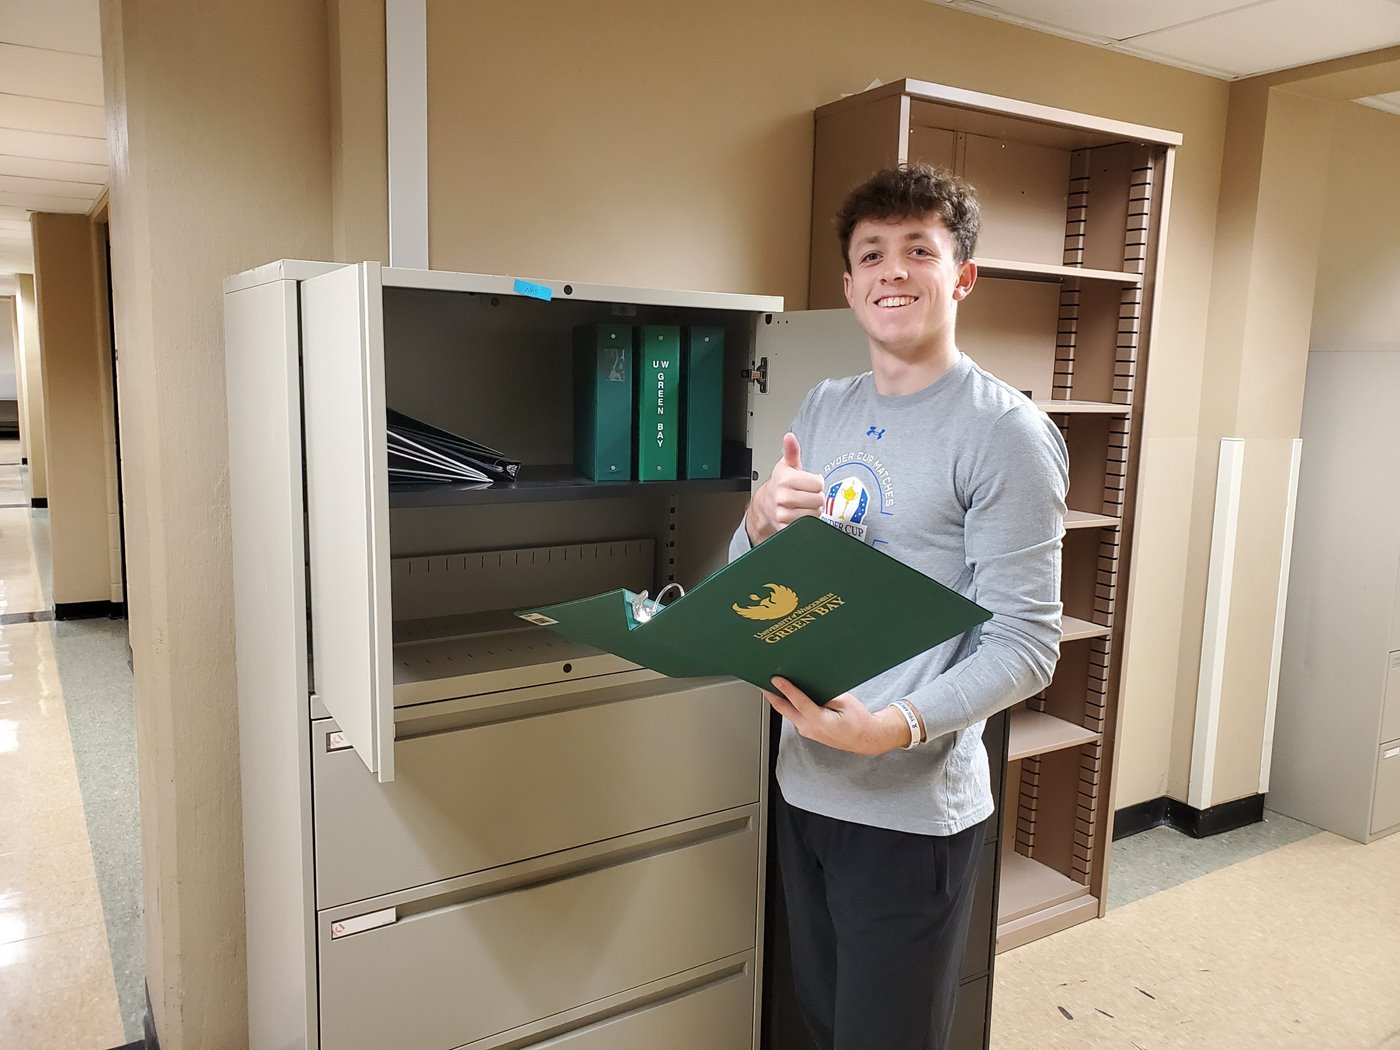 Student with a binder